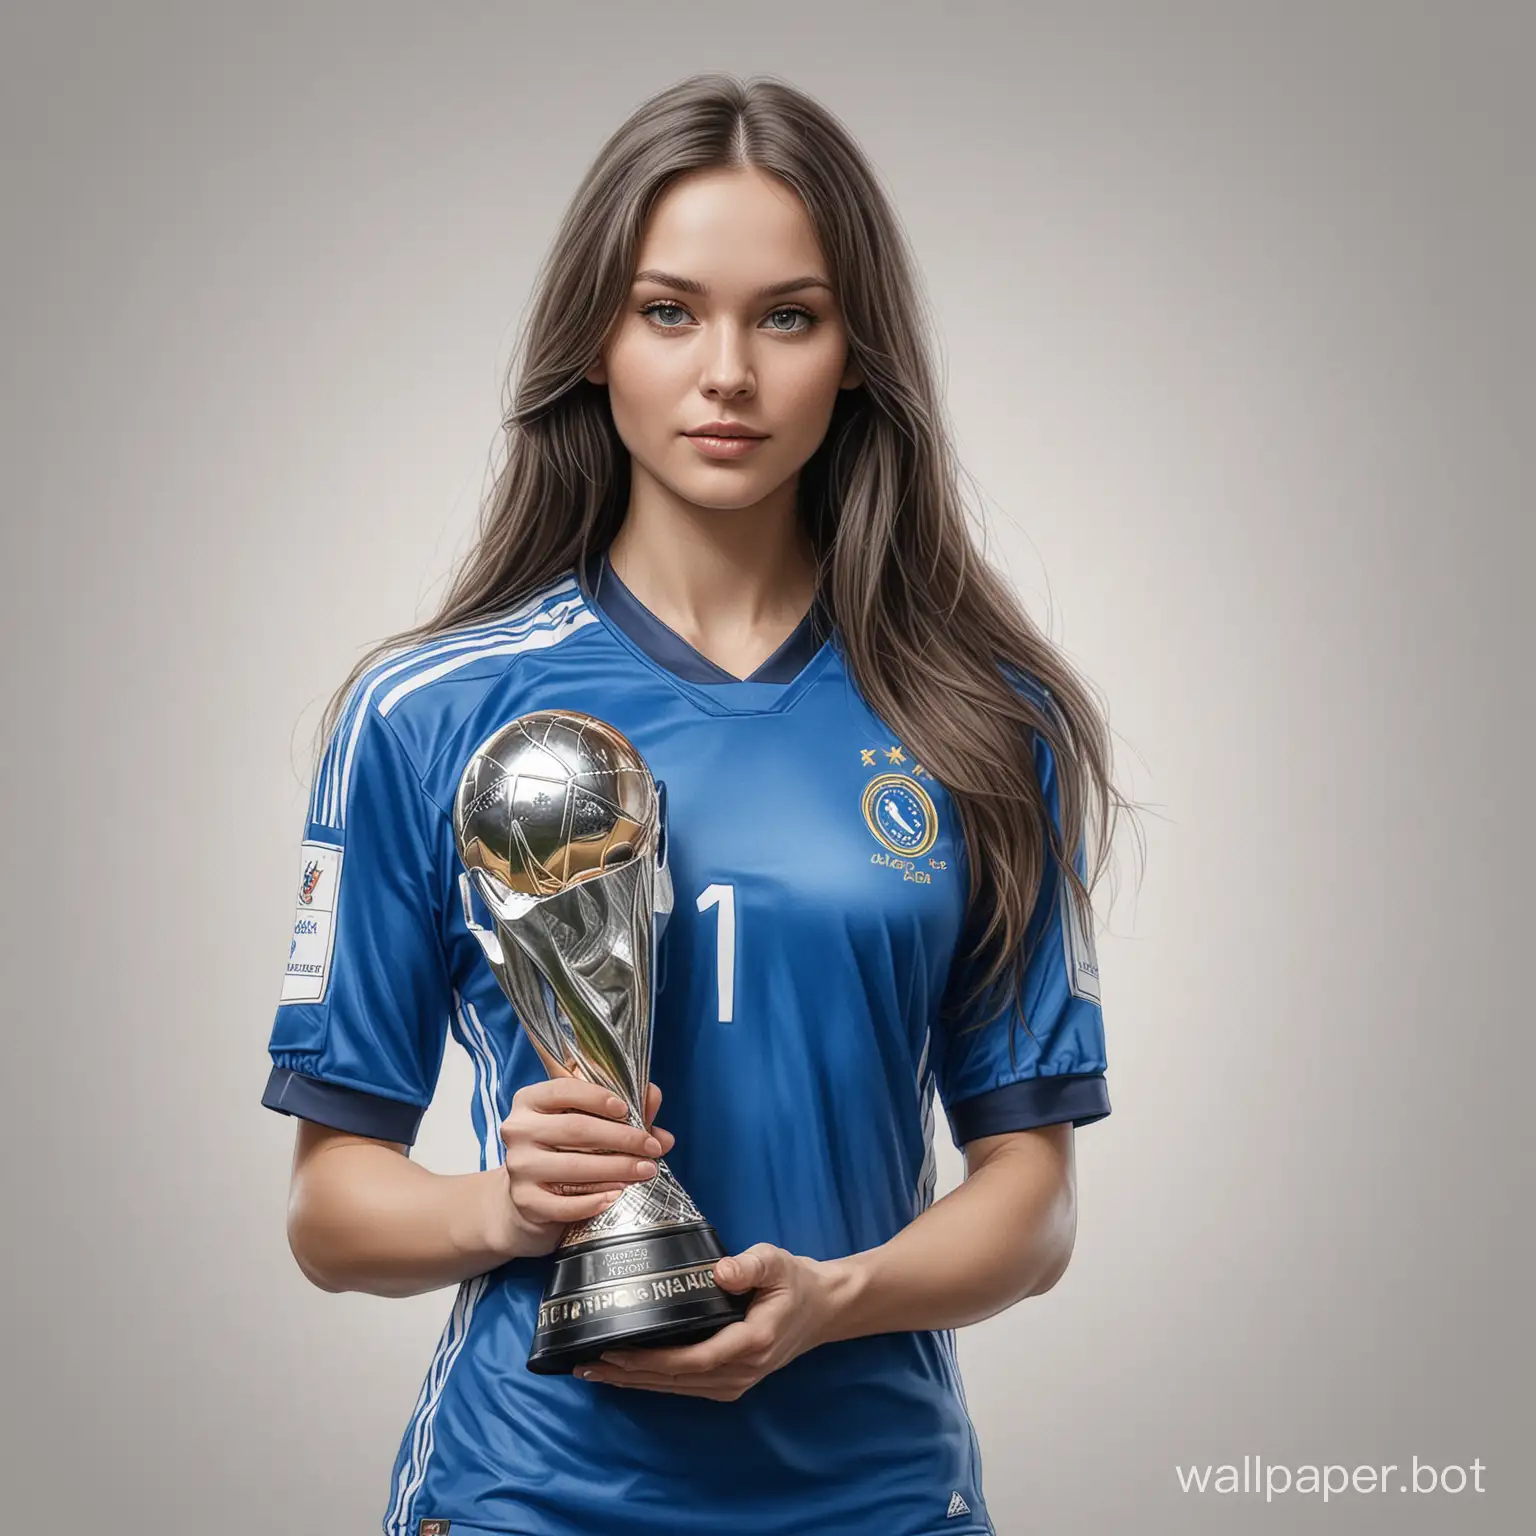 sketch young Lina Kozlova dark long hair 4 breast size narrow waist In blue soccer uniform holding a large Champions League trophy white background high realism drawing with liner sketch